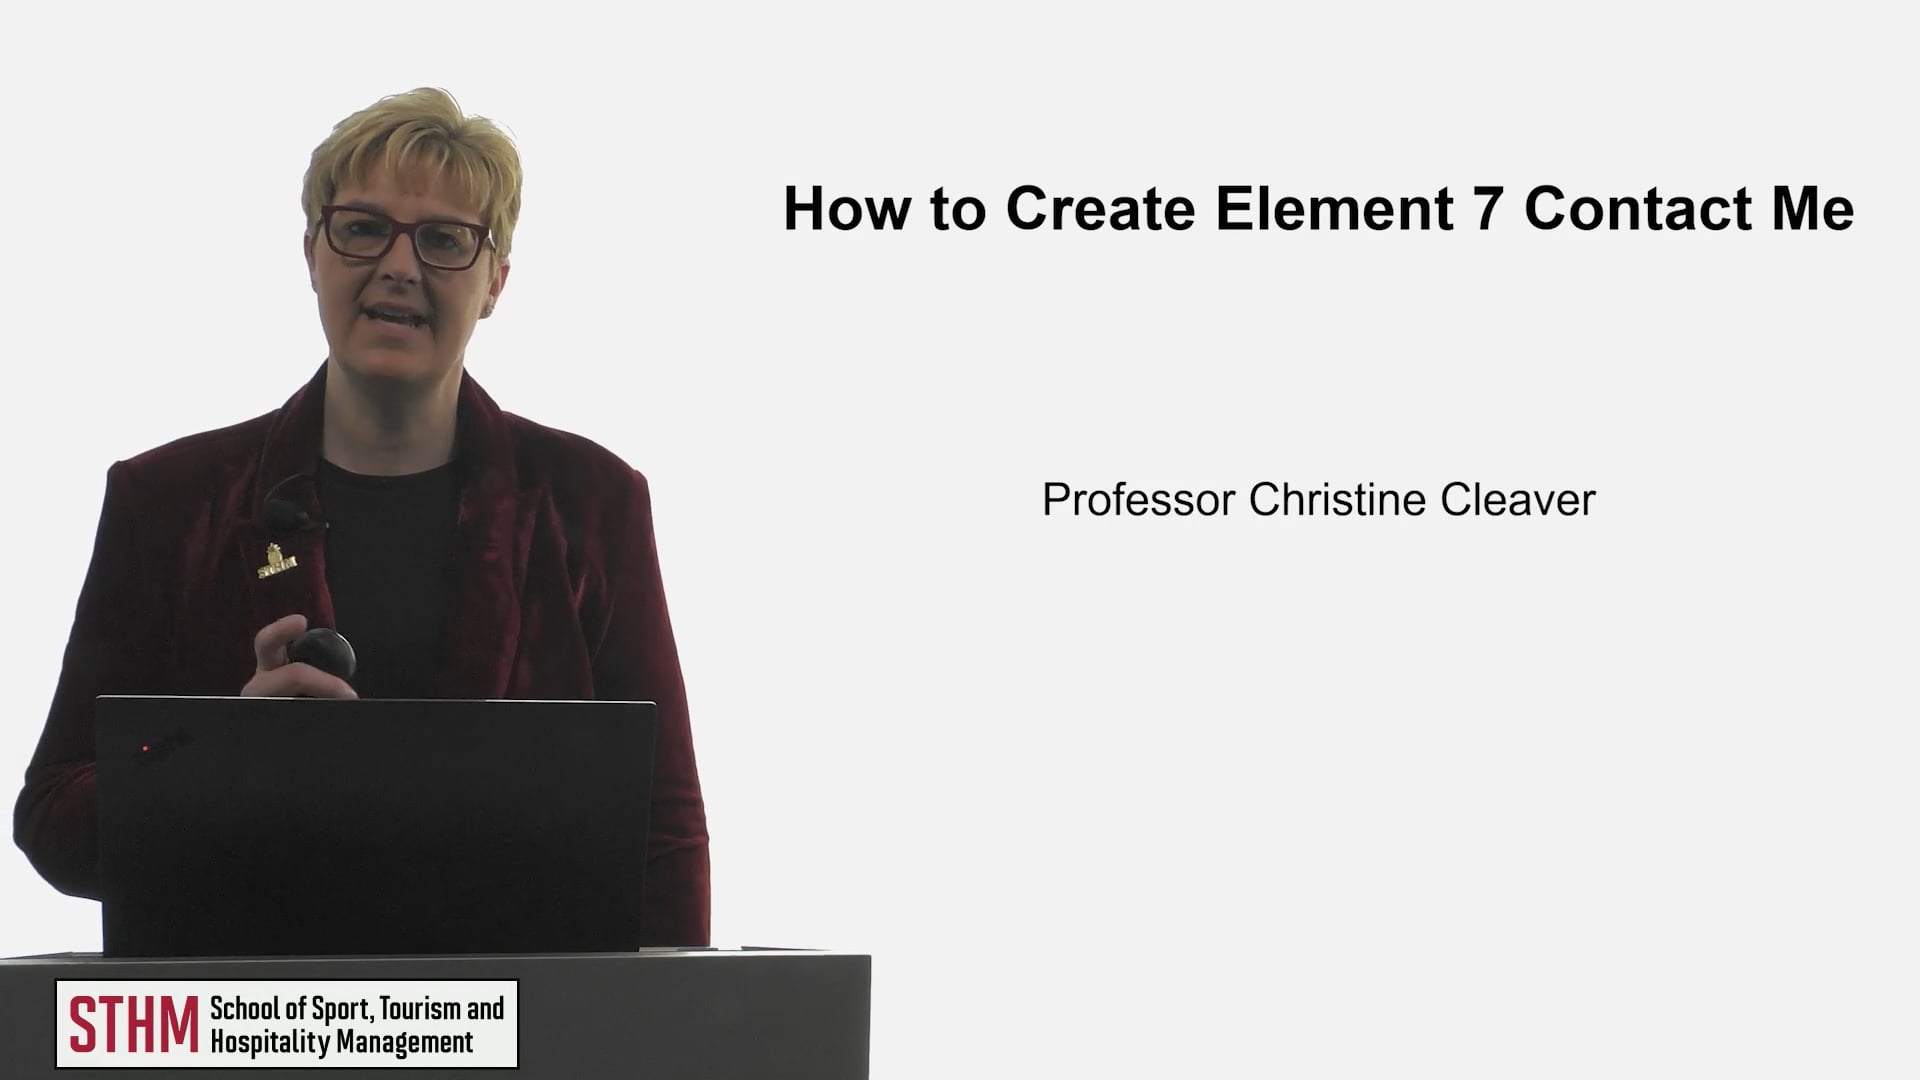 How to Create Element 7 – Contact Me